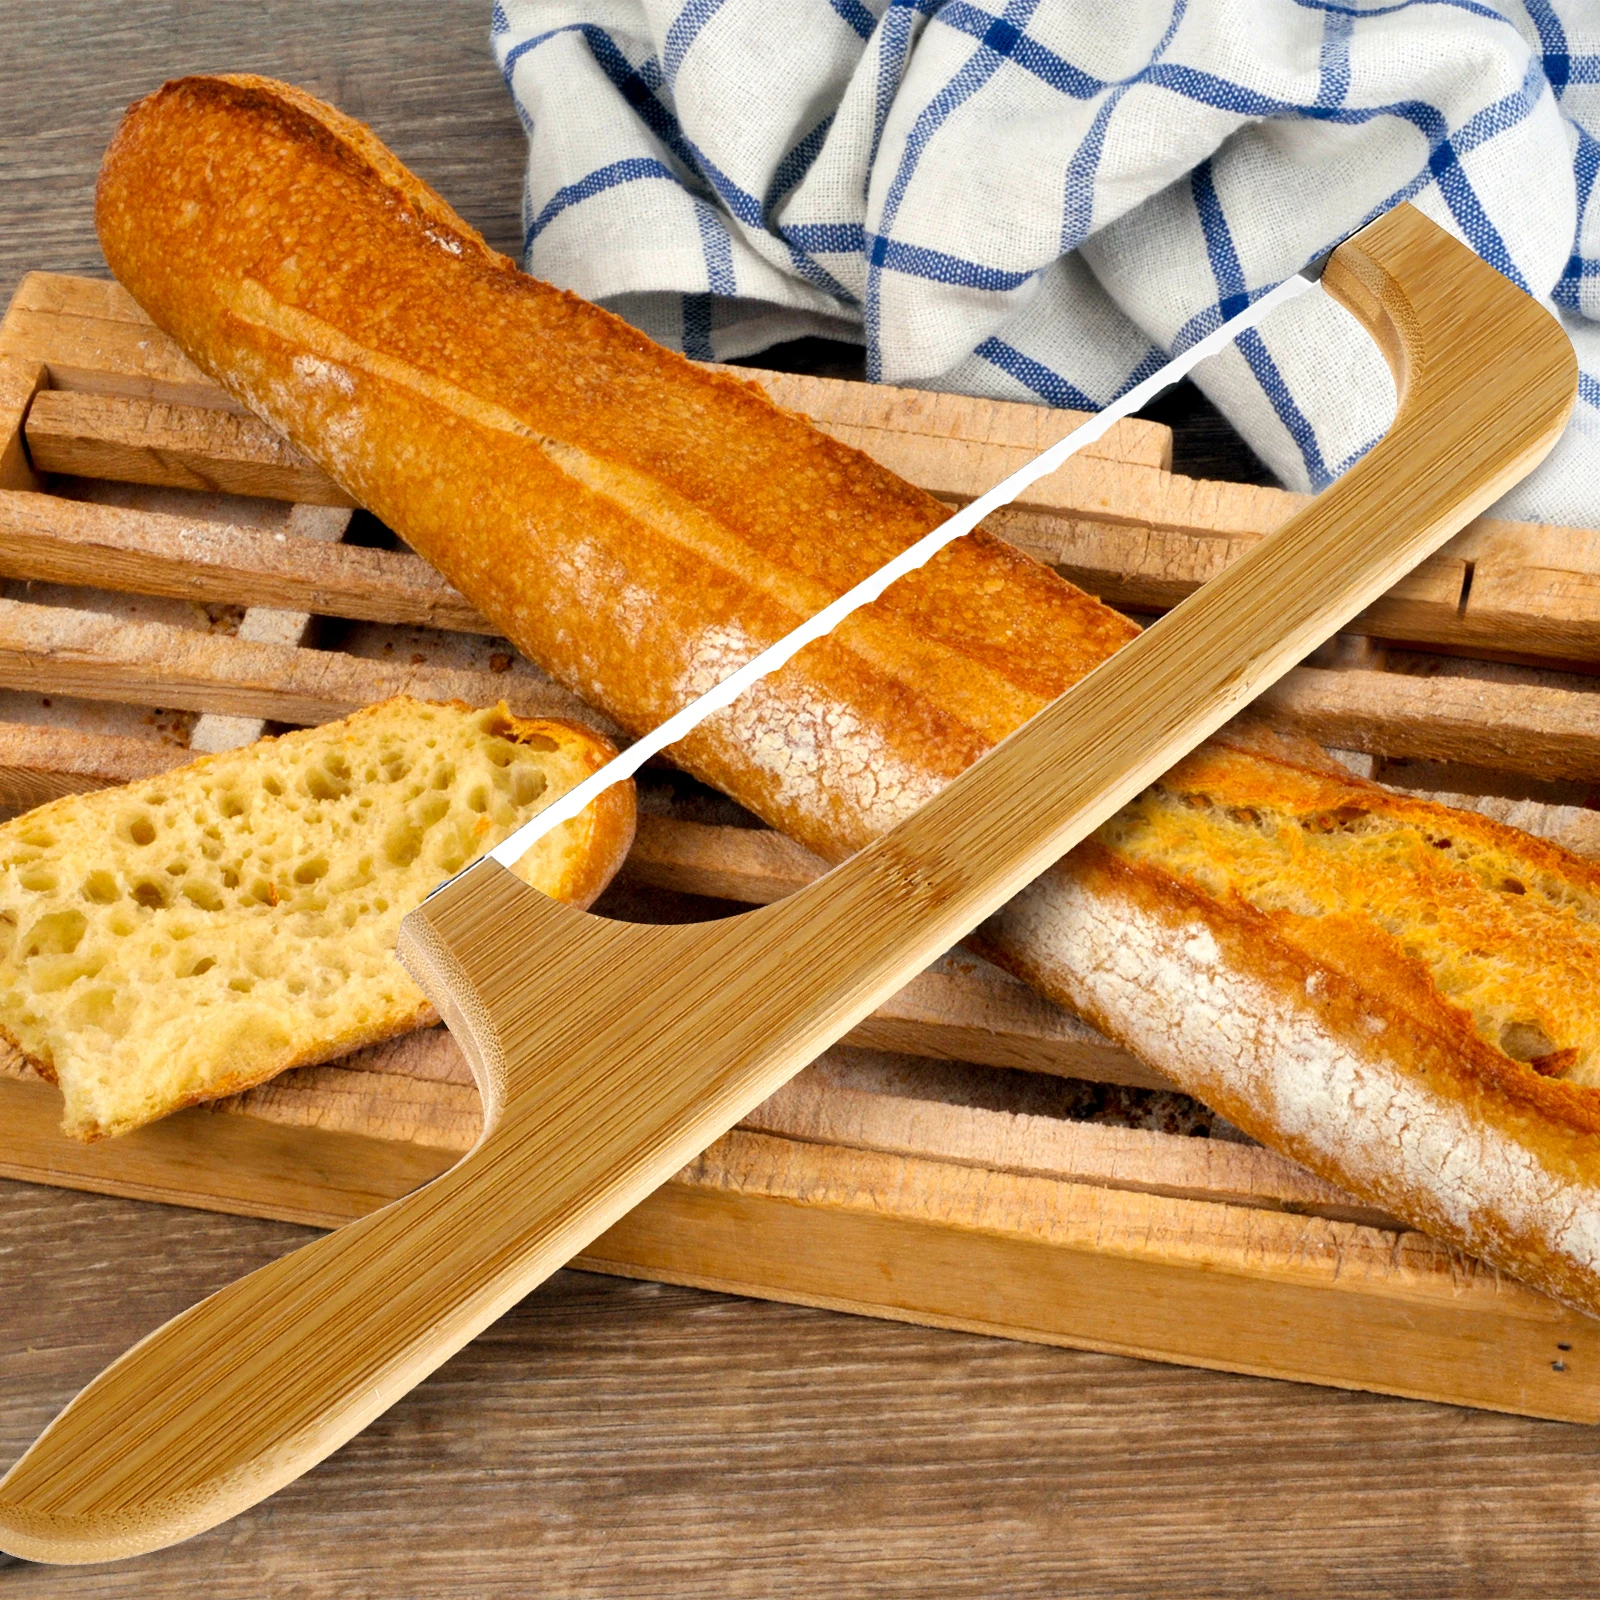 https://ae01.alicdn.com/kf/S93055d9b183743ed8a091011fb524faet/Bread-Bow-Cutter-Stainless-Steel-Bread-Cutting-Tool-with-Wood-Handle-Serrated-Bagel-Cutter-Homemade-Bagels.jpg